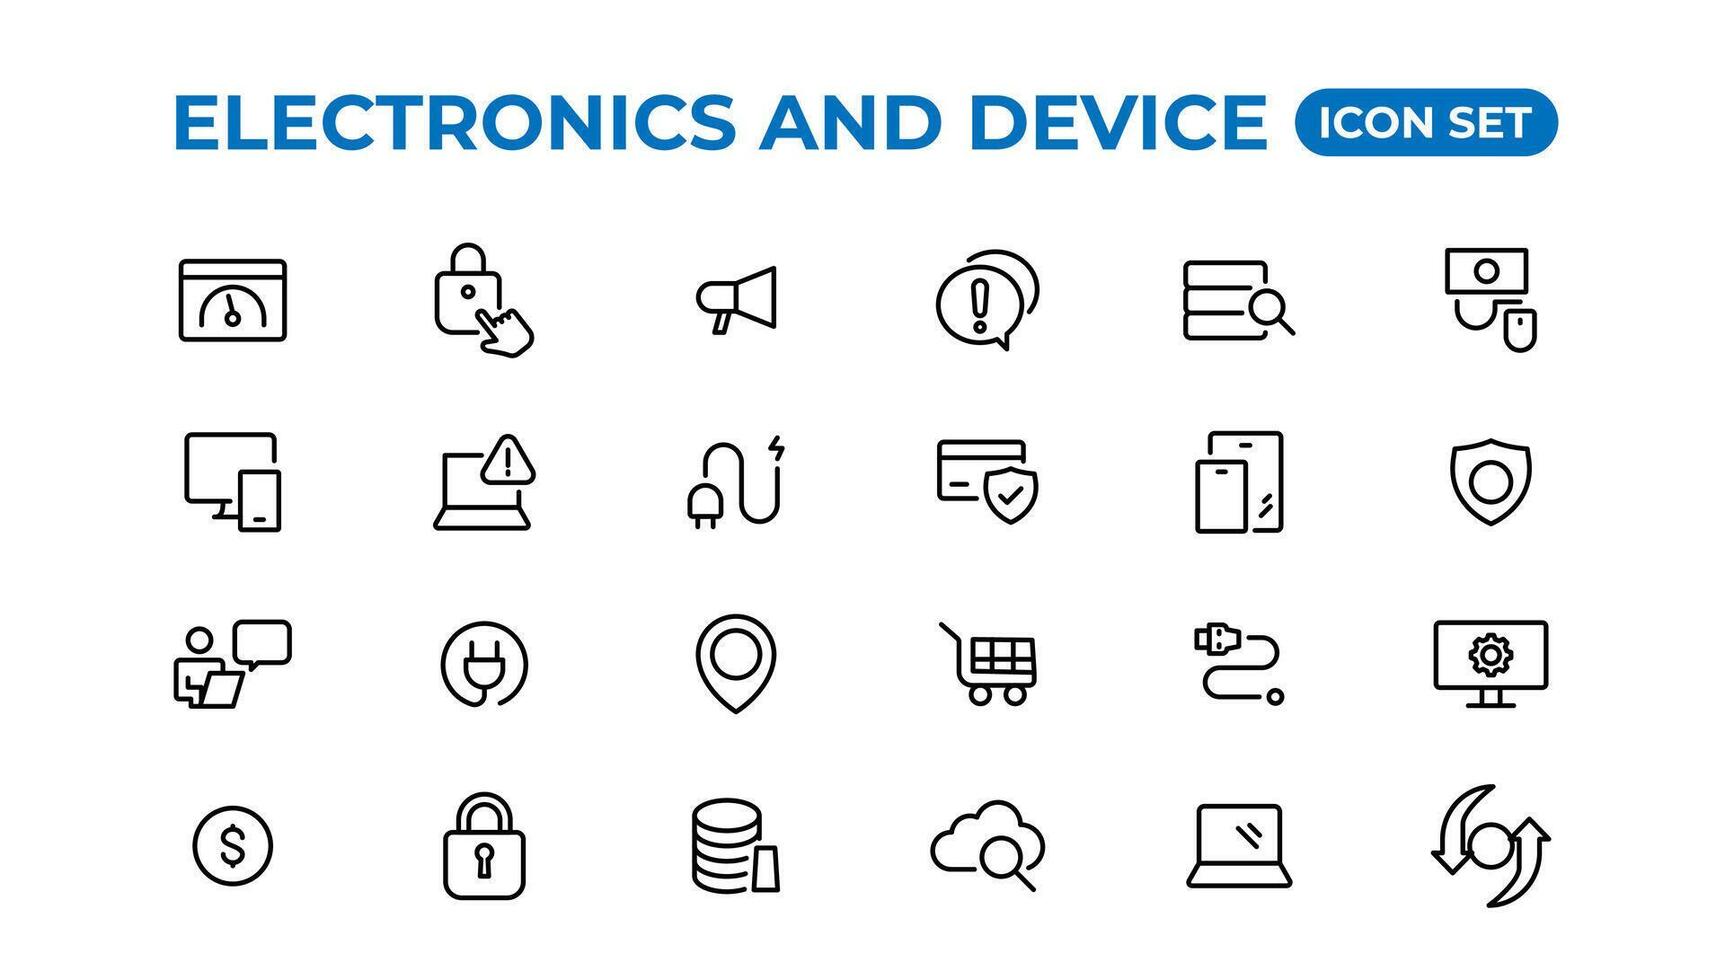 Electronics and device lines icon set. Electronic devices and gadgets, computer, equipment and electronics. Computer monitor, smartphone, tablet and laptop sumbol collection. vector